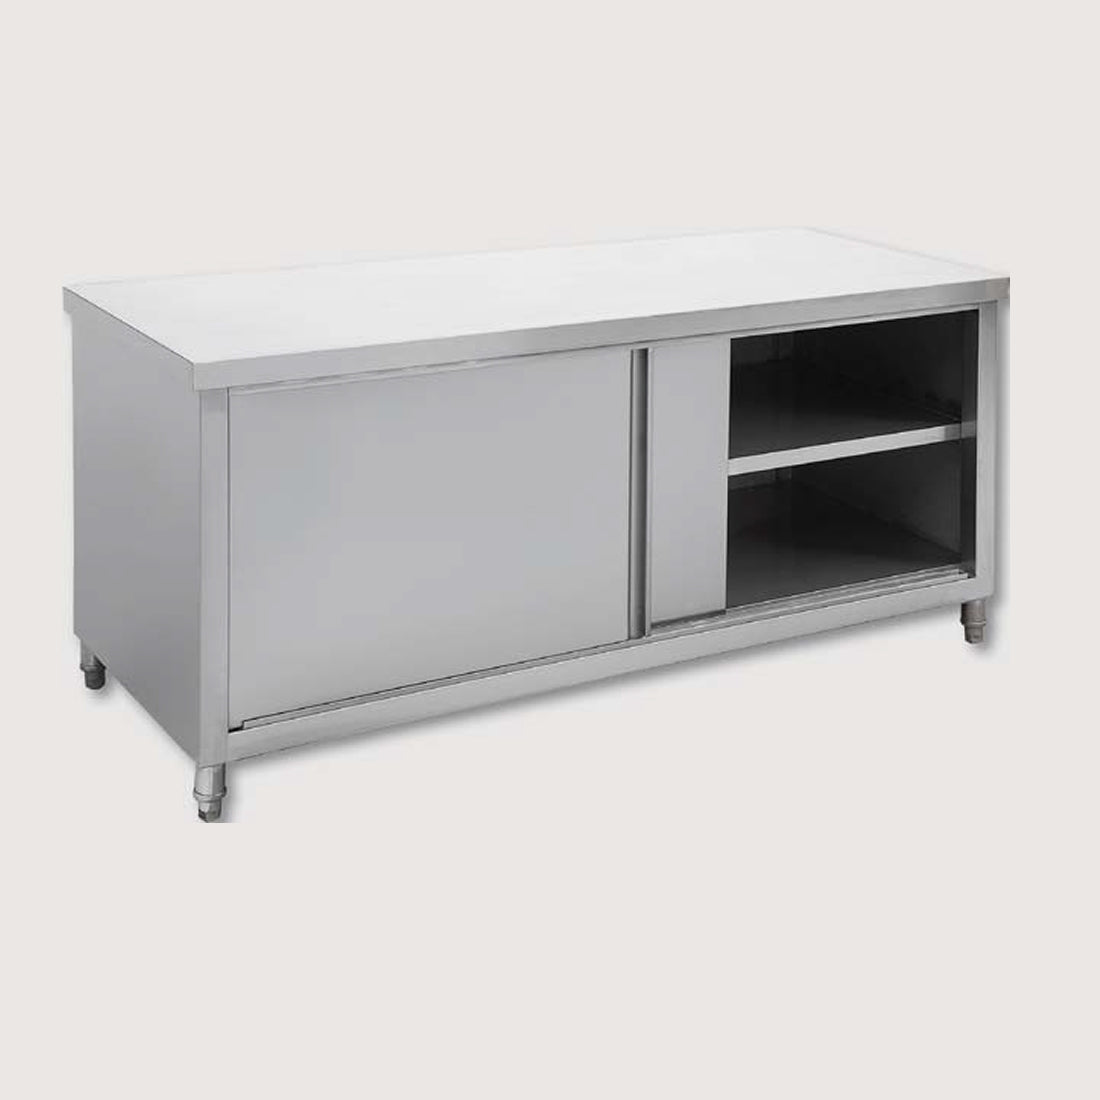 Quality Grade 304 S/S Pass though cabinet ( double sided) - STHT-1500-H